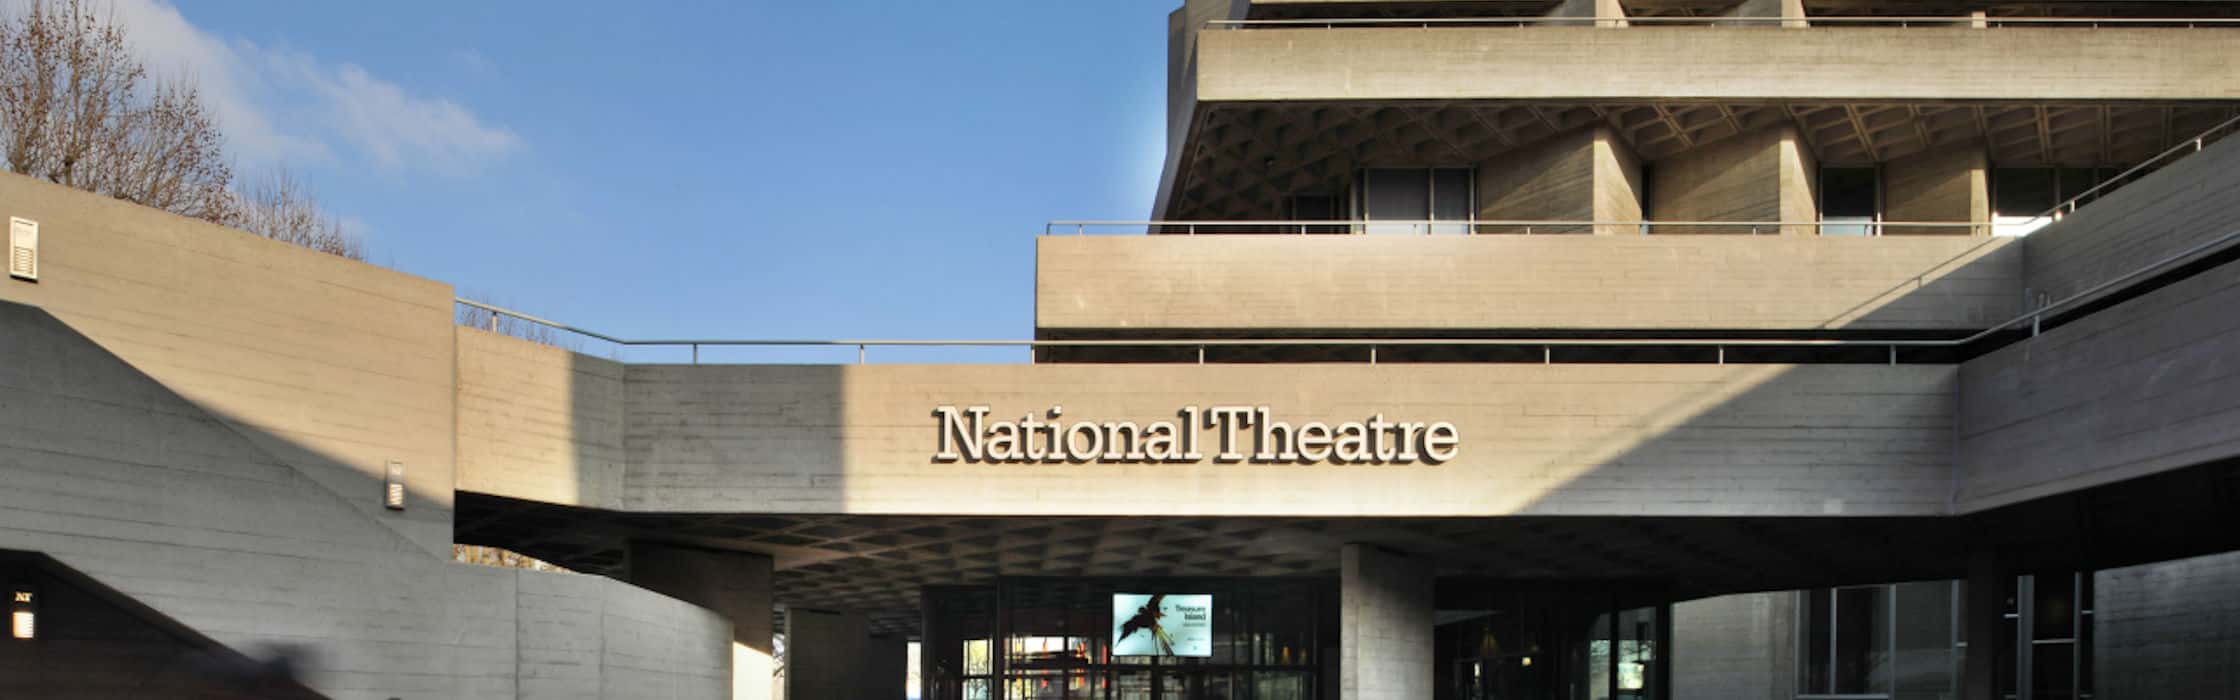 What's On at The National Theatre, London